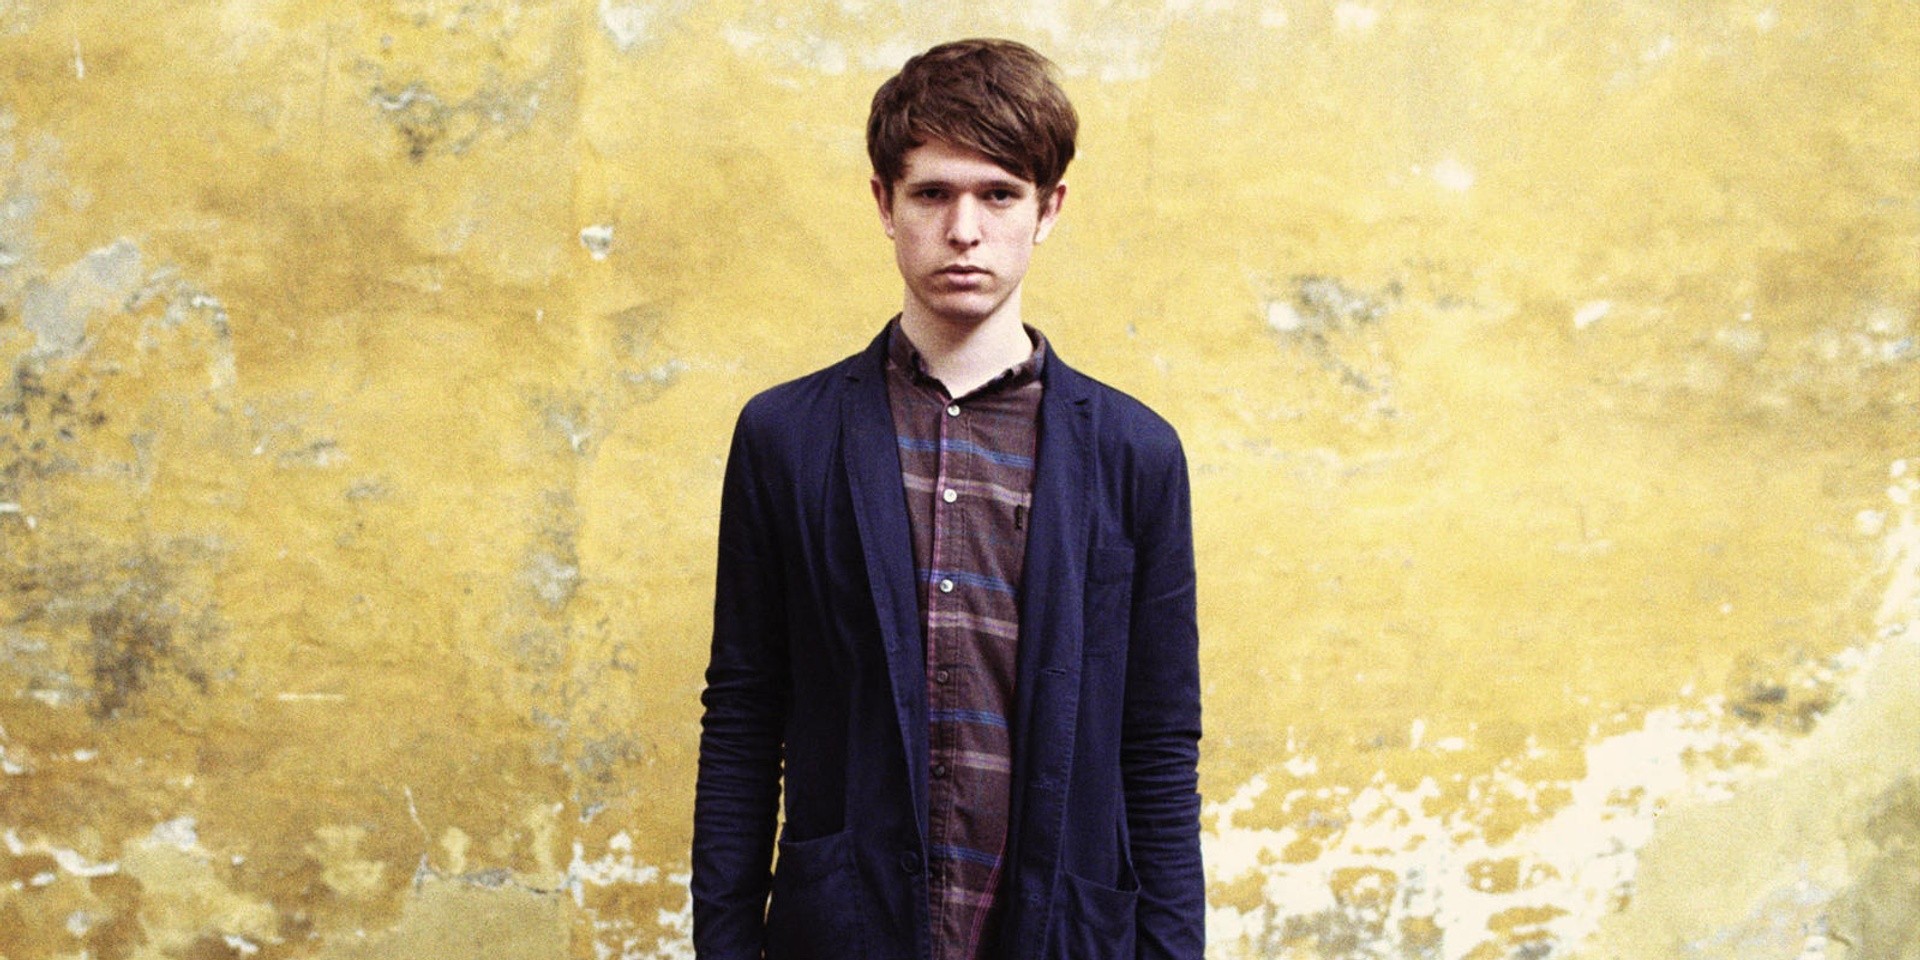 ALBUM REVIEW: James Blake - The Colour In Anything